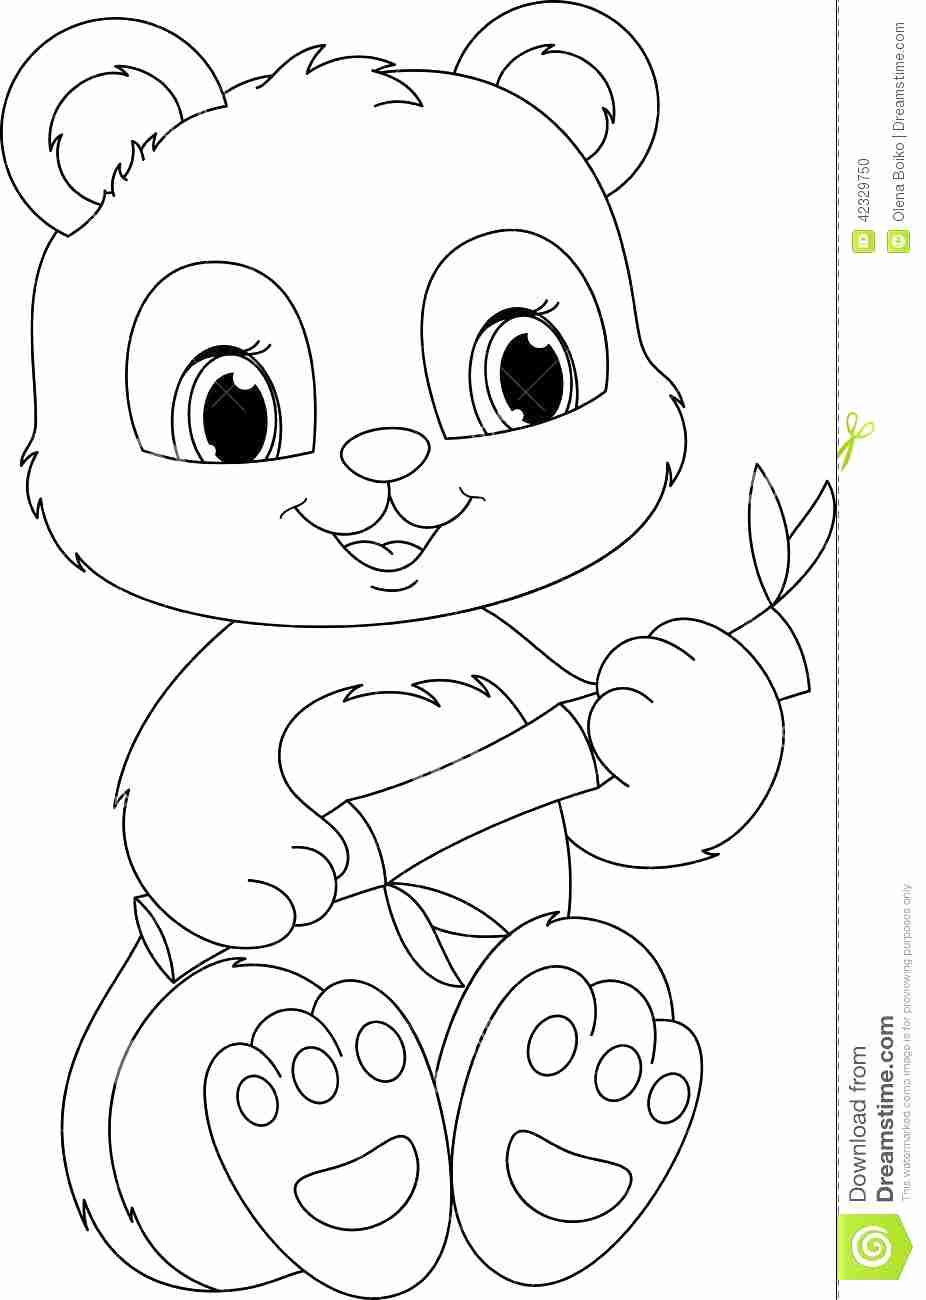 Panda Cute Baby Animal Coloring Pages Are you searching for baby